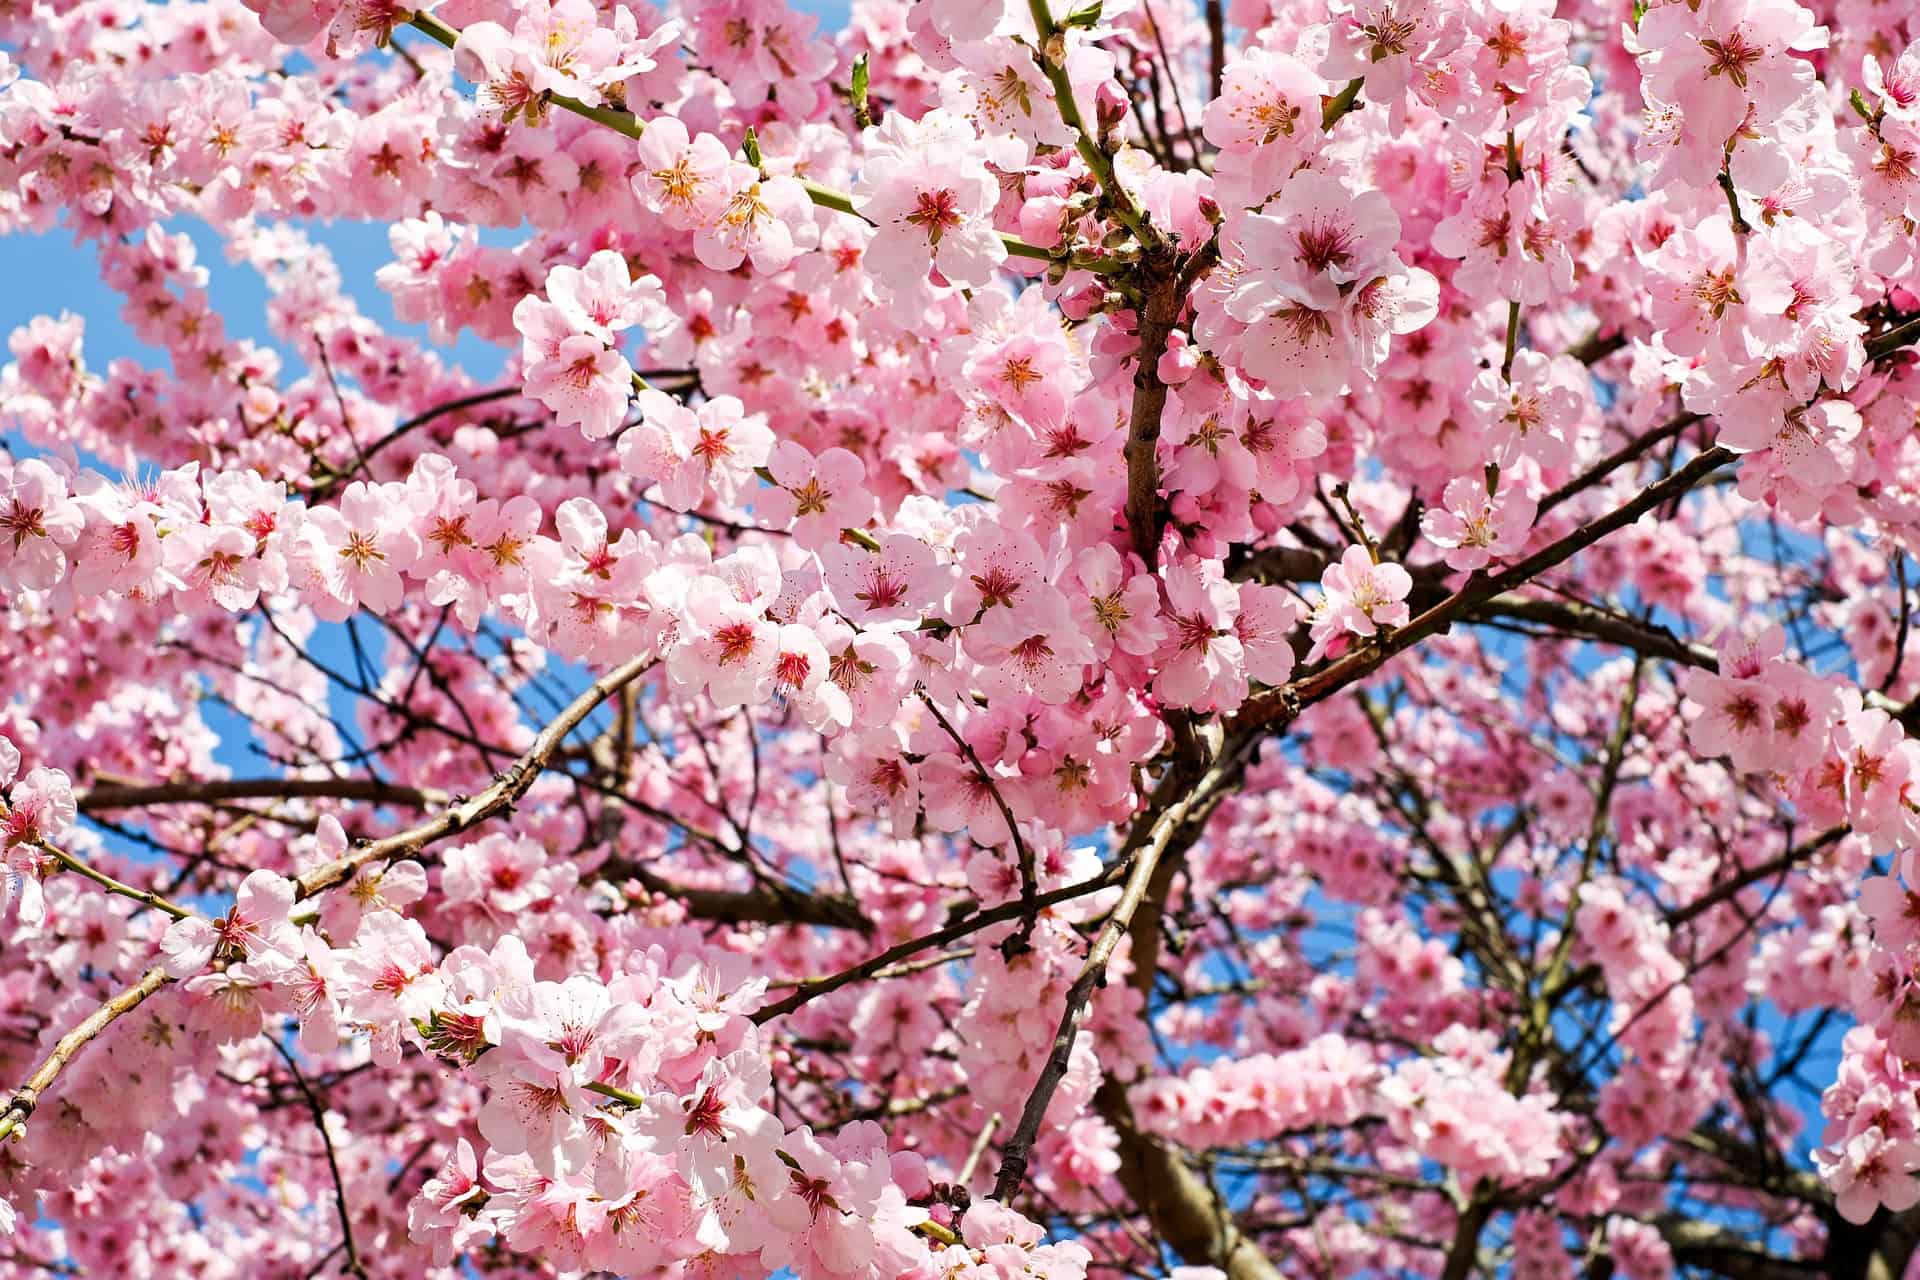 A pink cherry blossom trees in full bloom